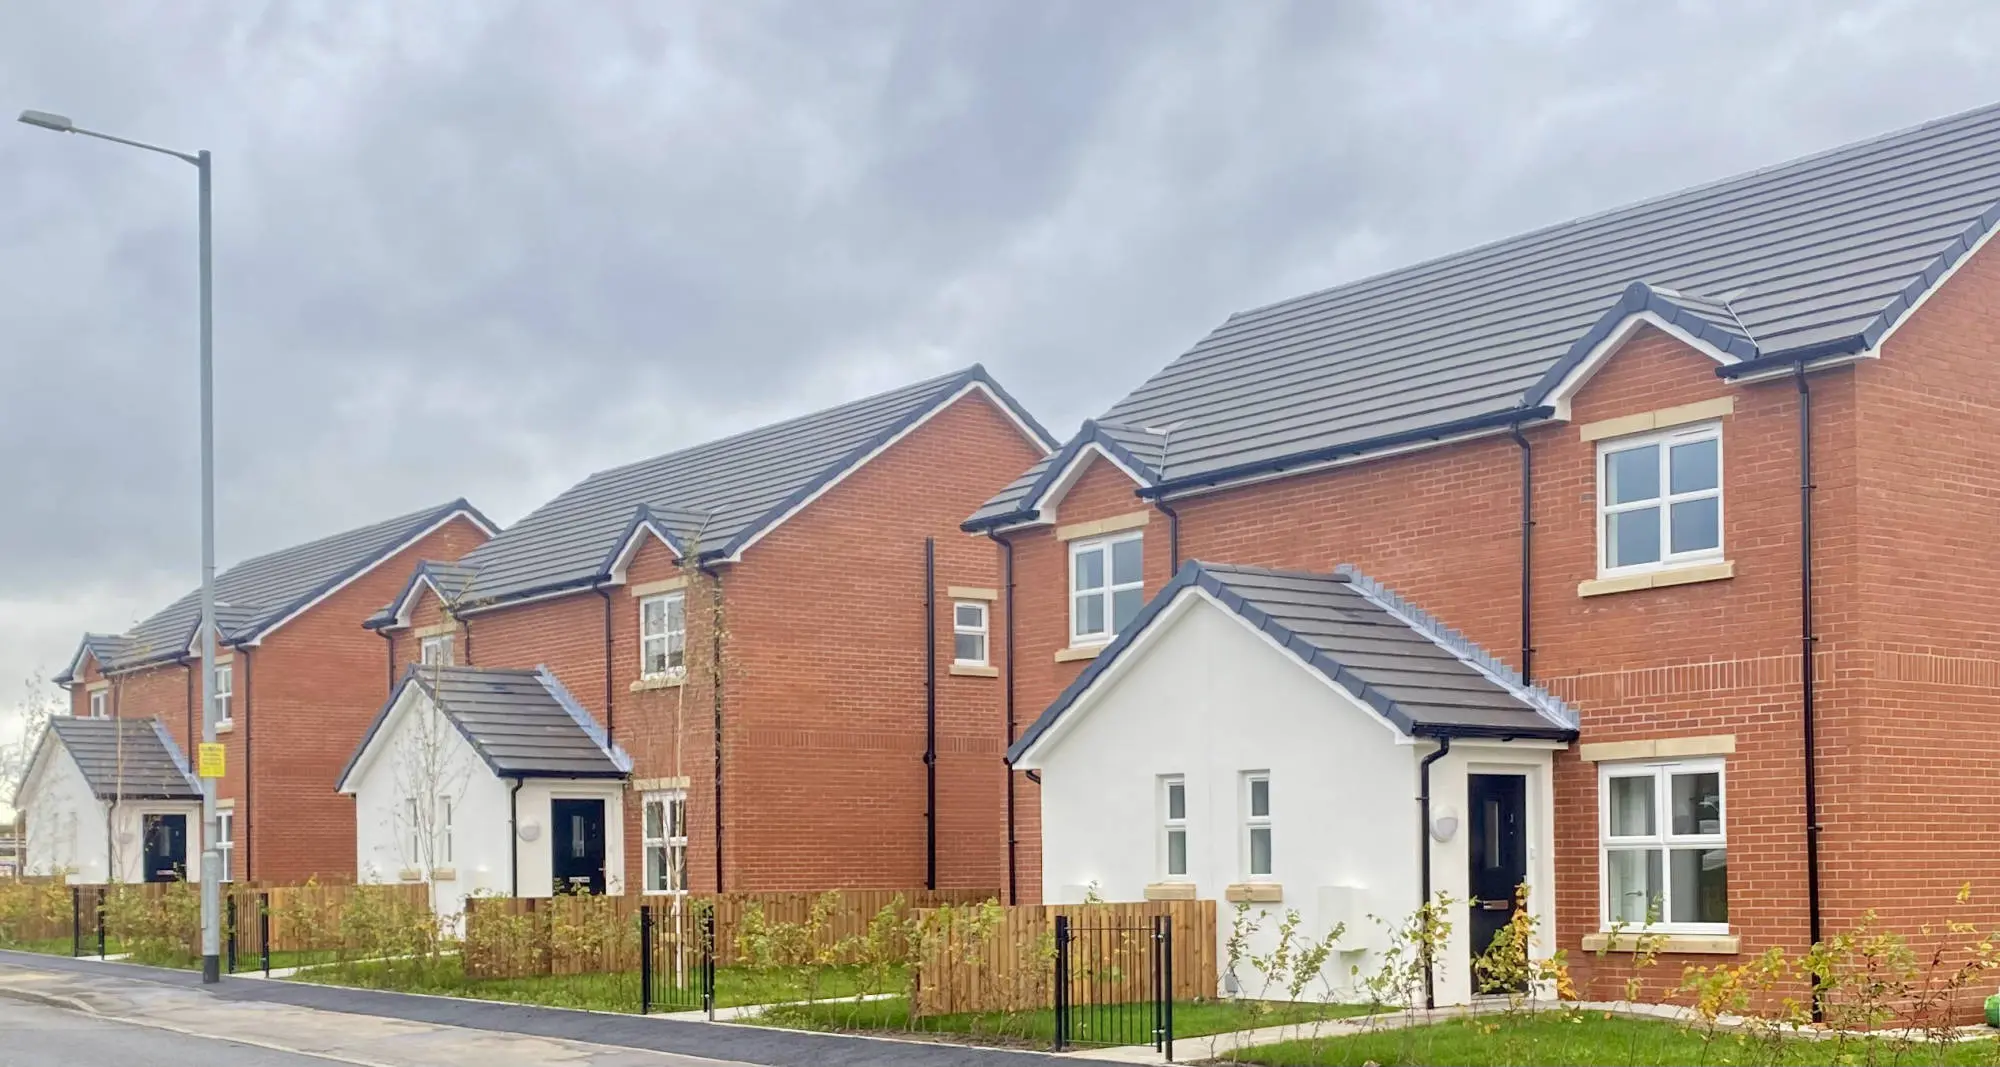 West Lancashire new homes near Ormskirk